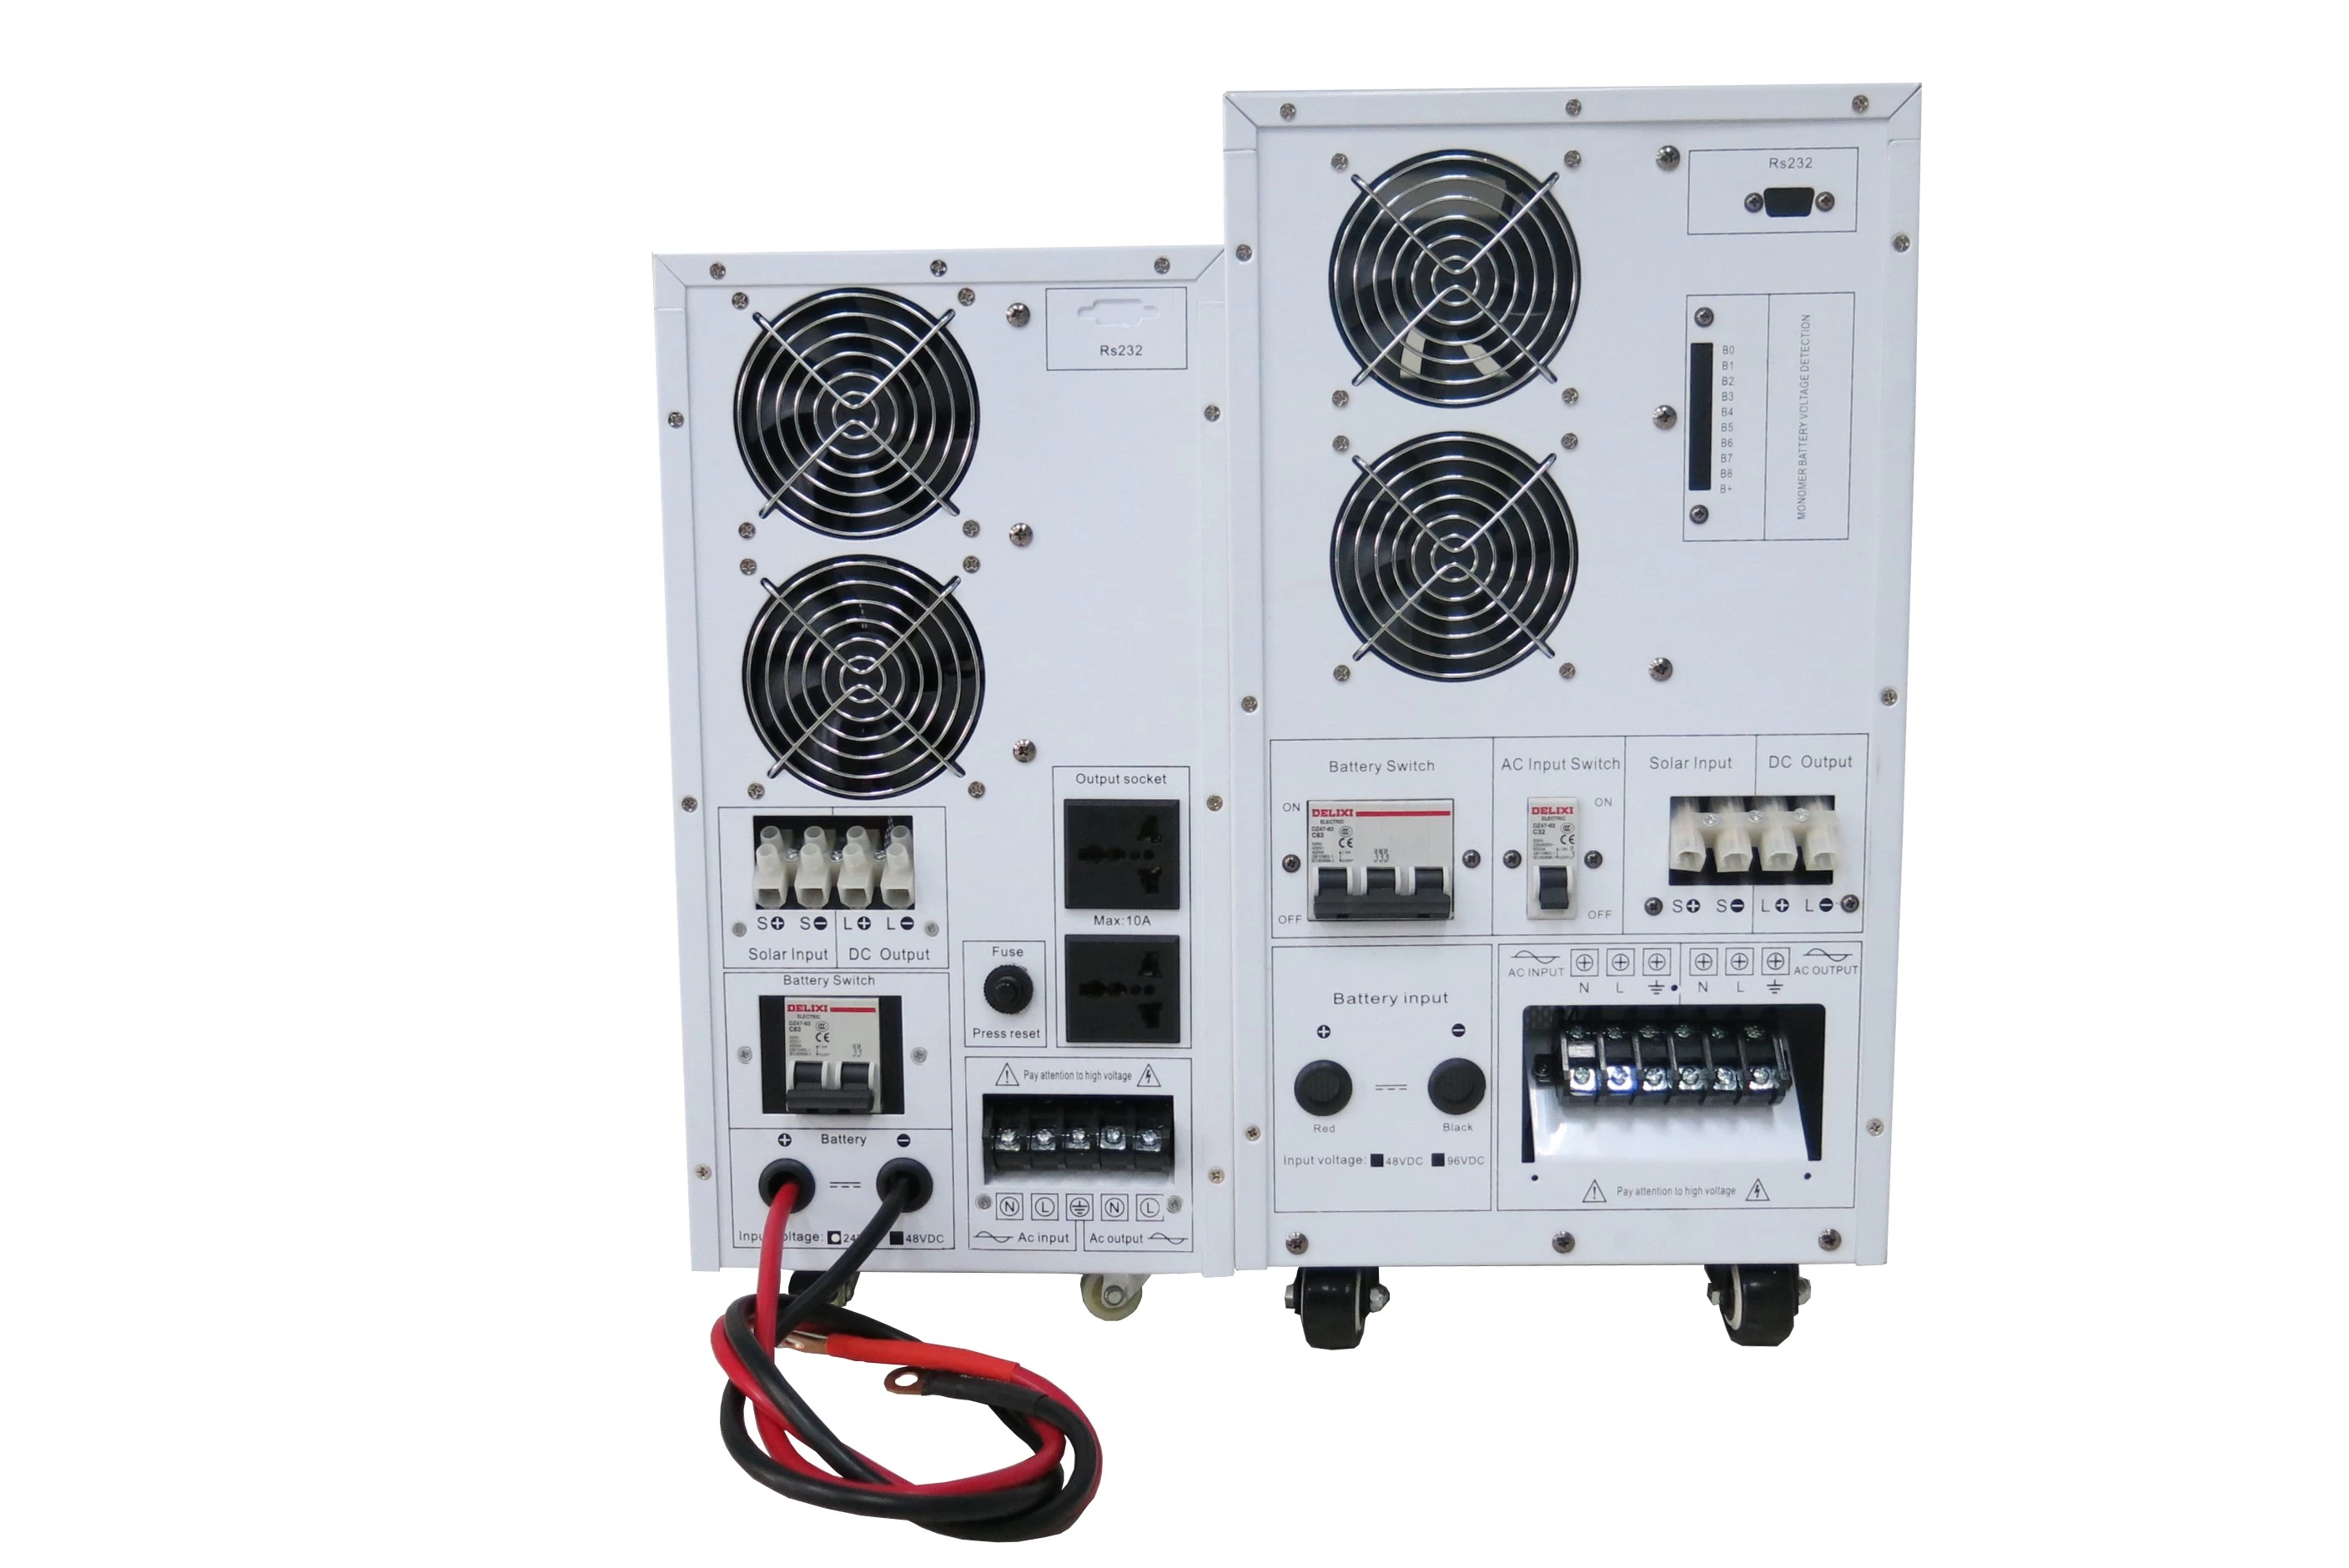 Shenzhen I-panda pure sine wave 1000W 1500W 2000W 3000W 4000W 5000W inverter with built-in MPPT solar charge controller